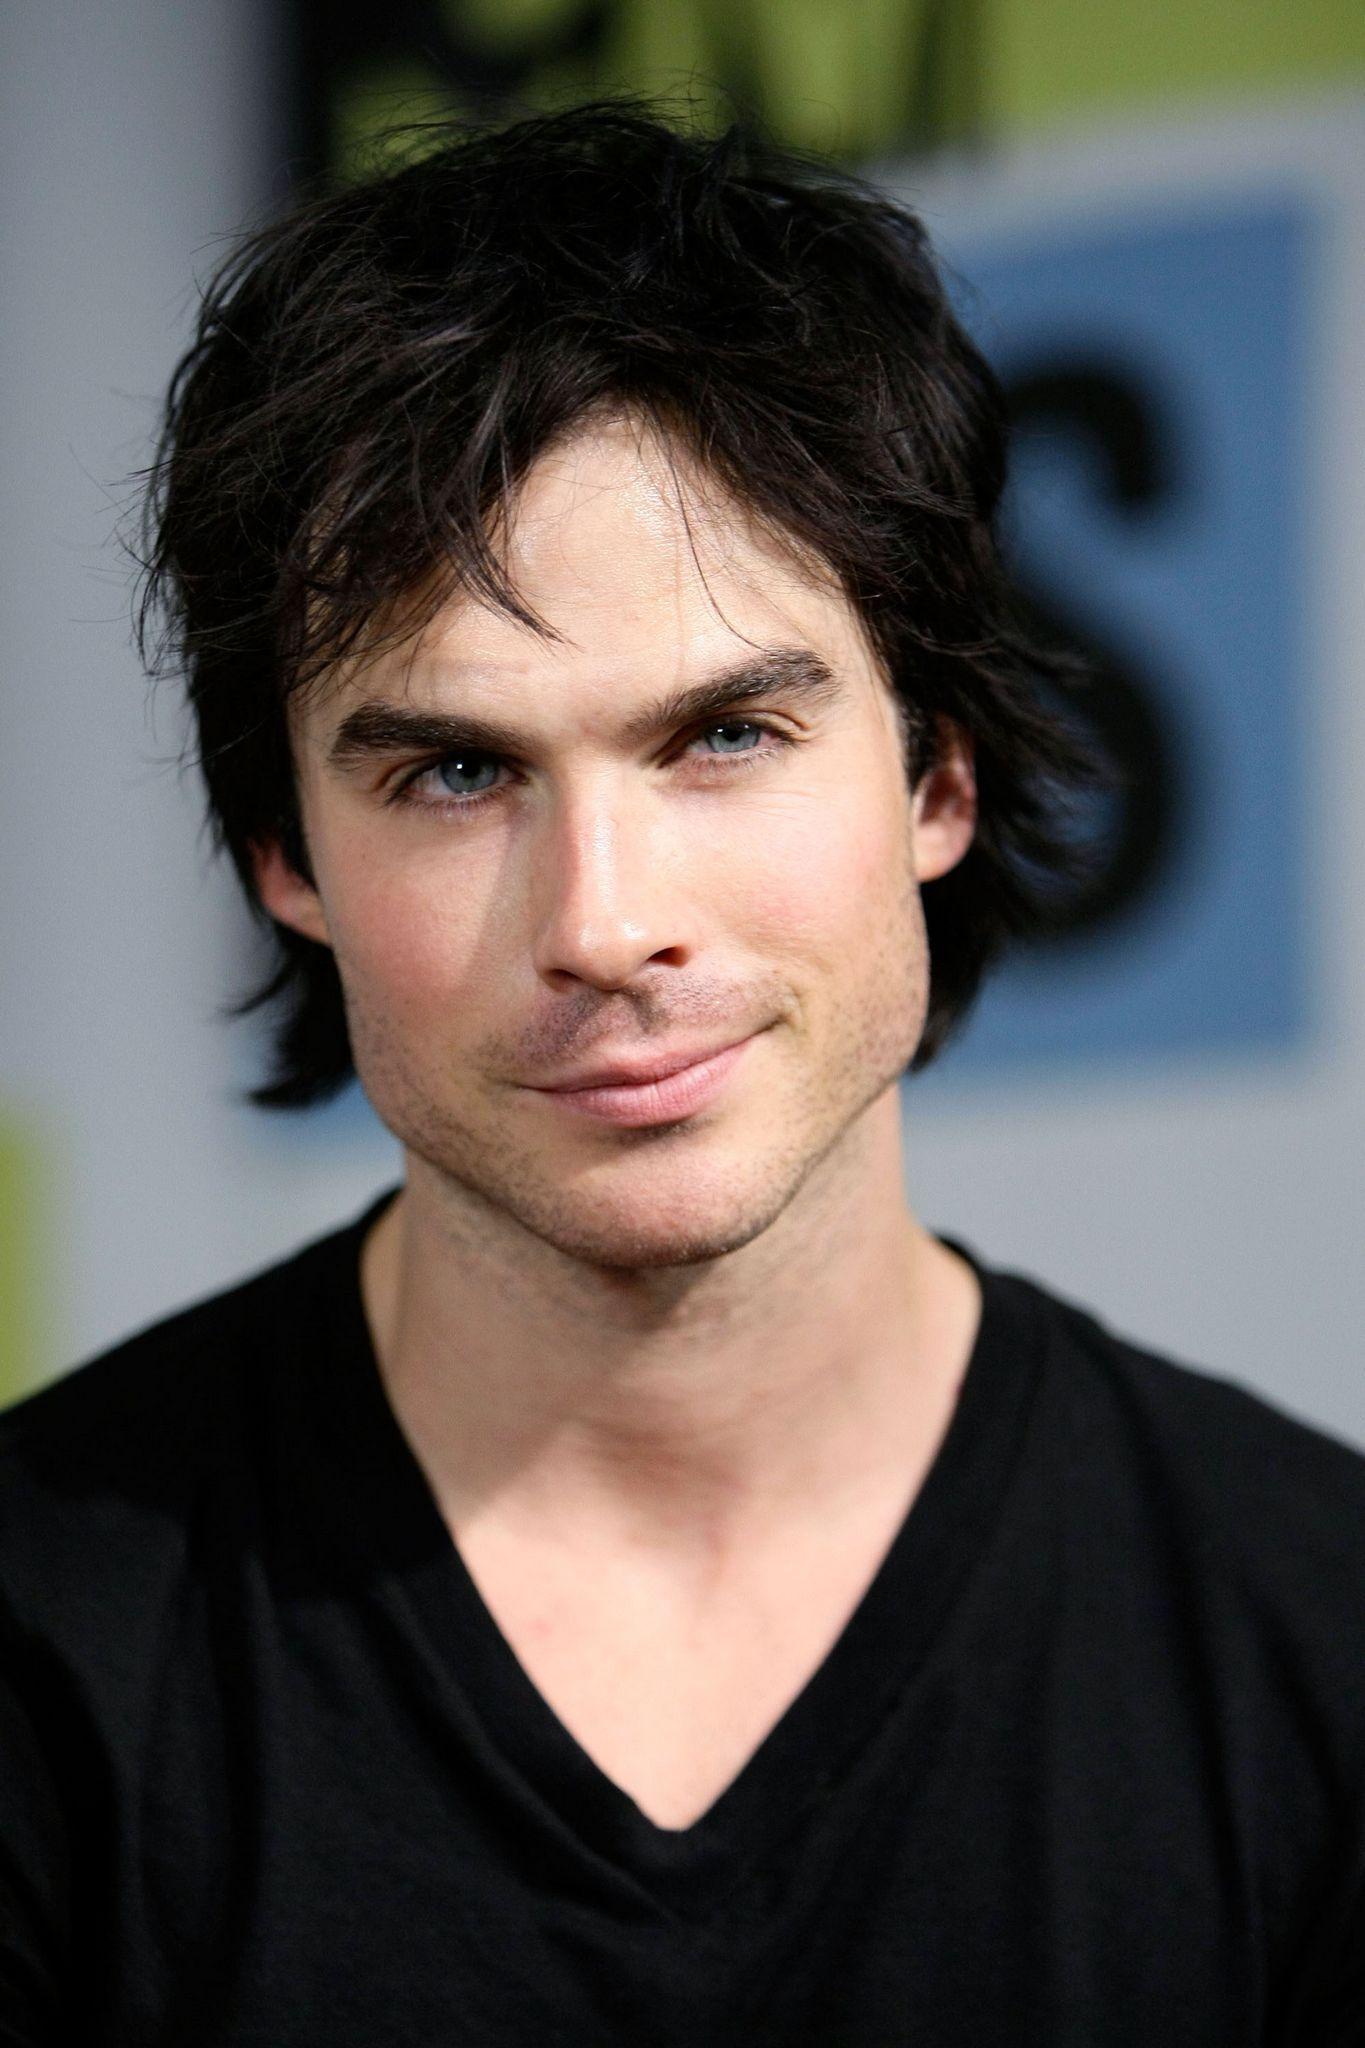 Wallpapers Of The Day: Damon Salvatore.